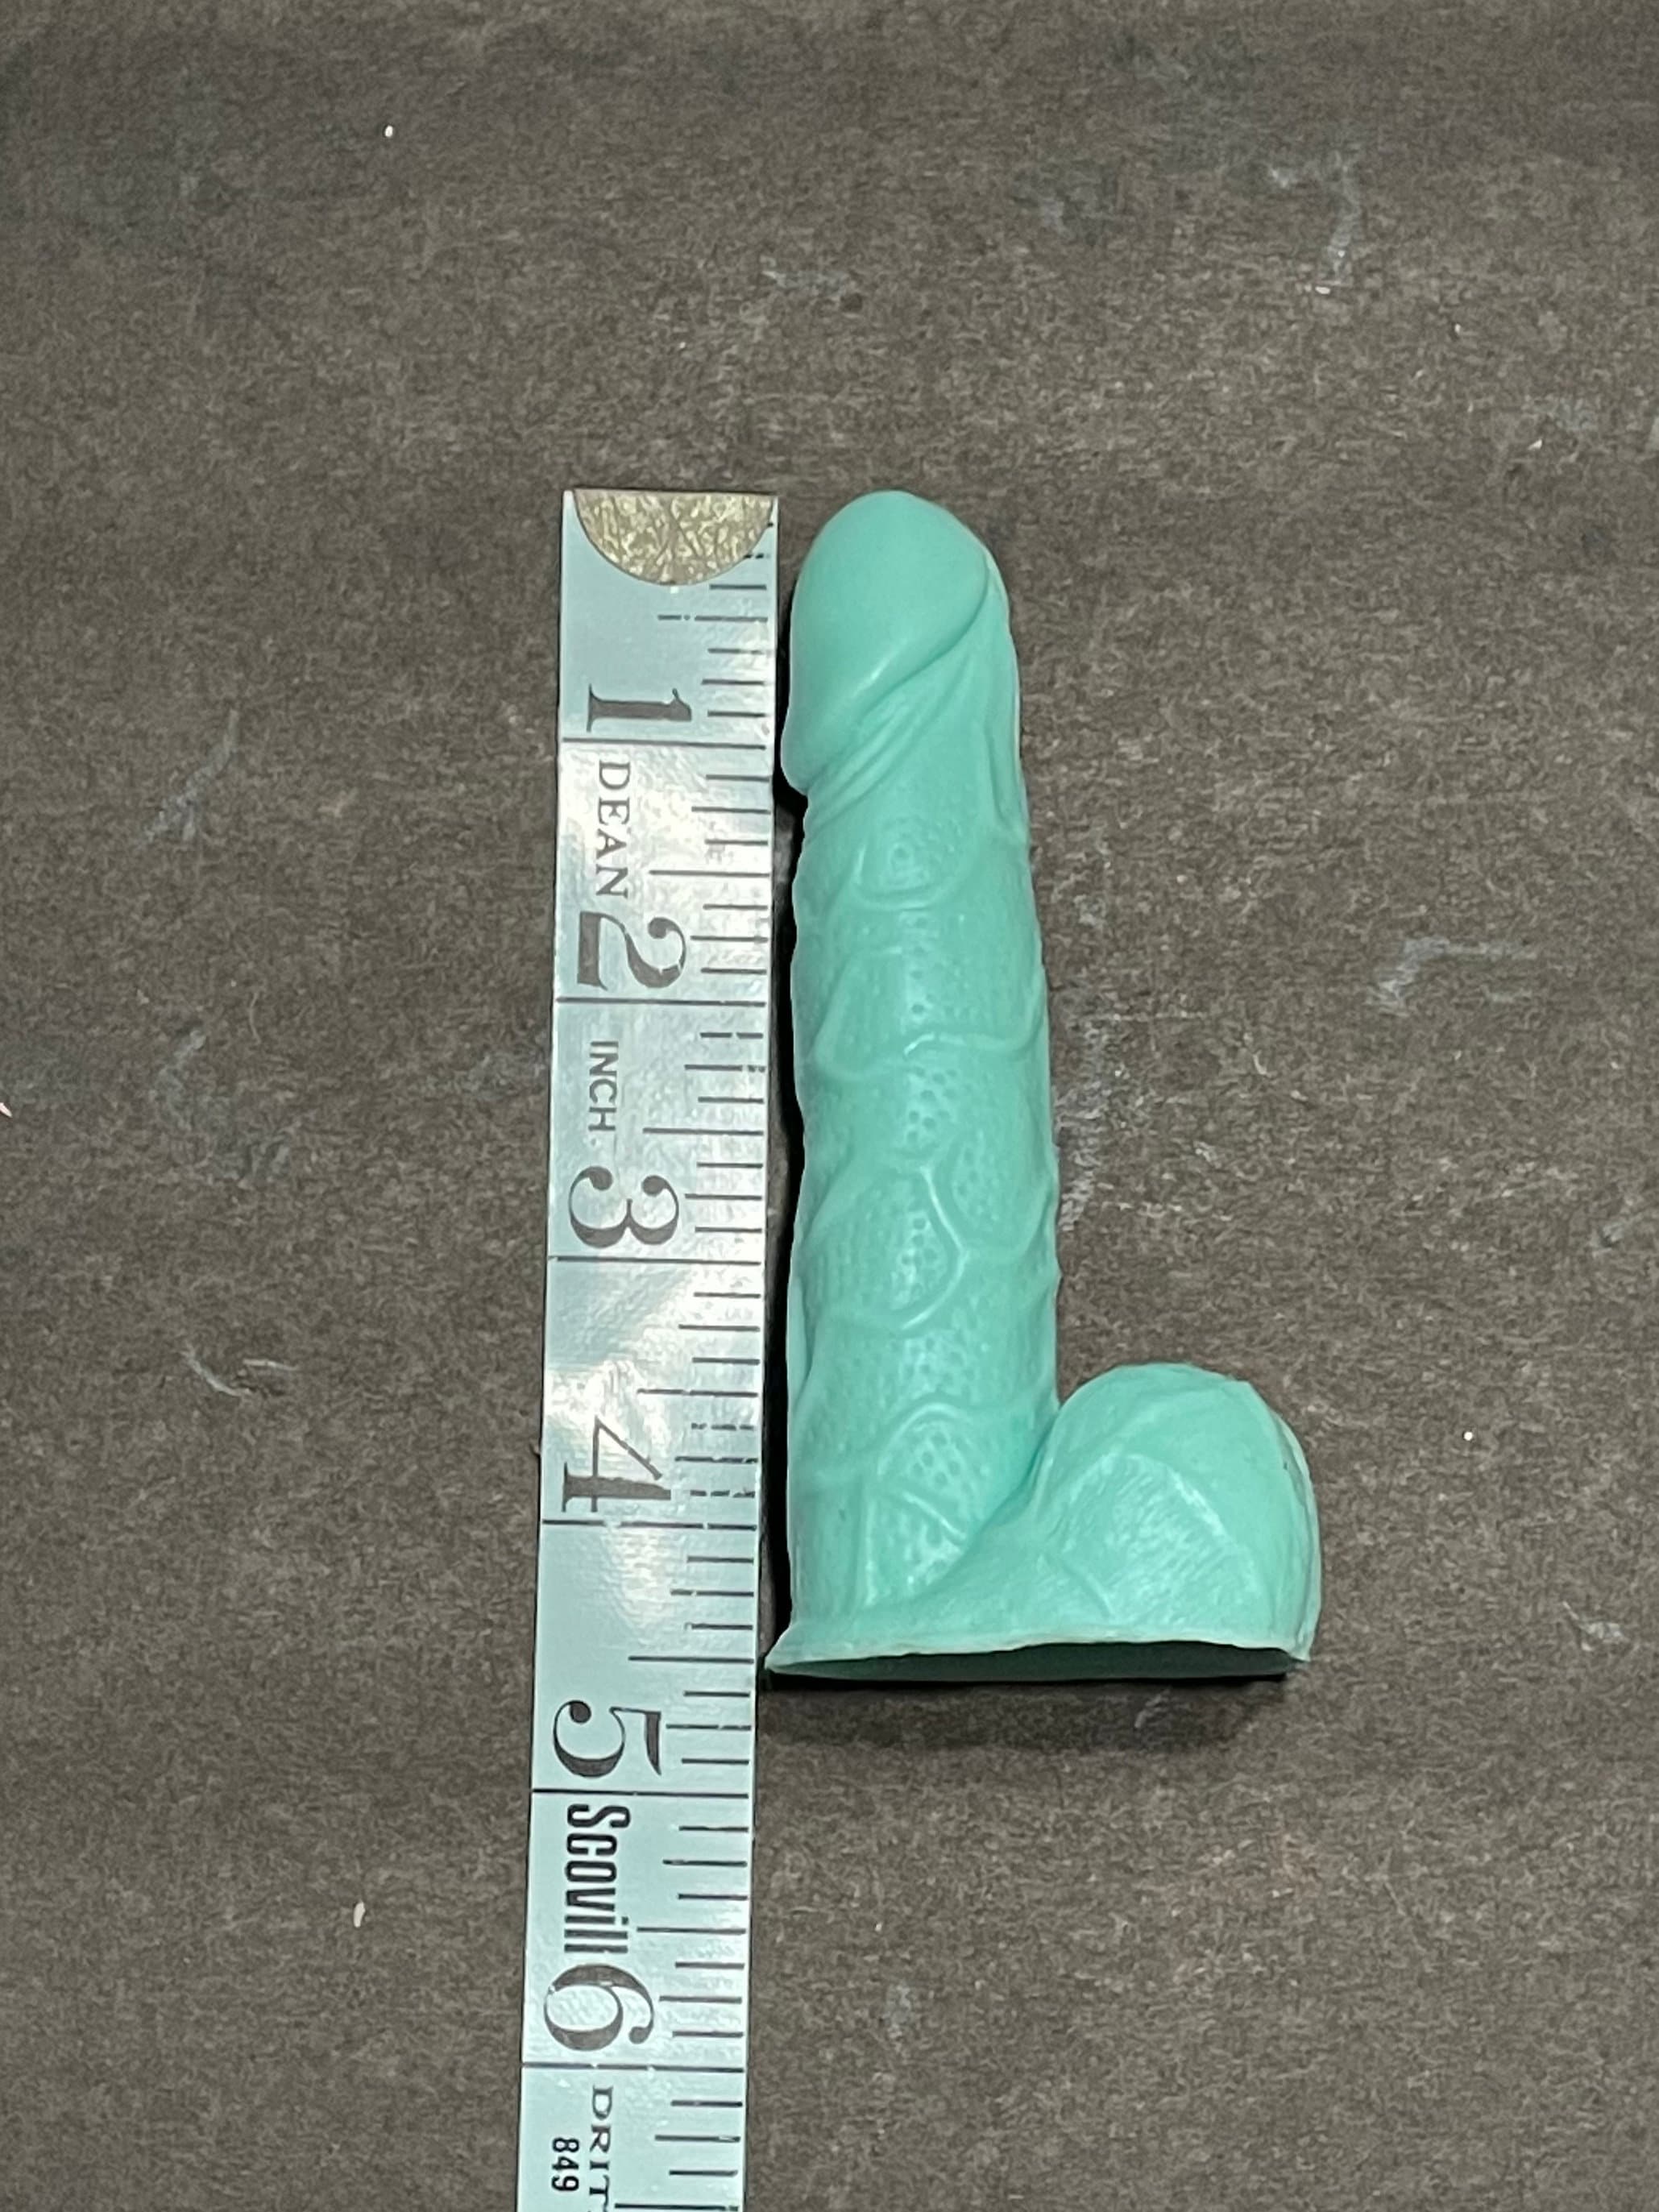 danny martland recommends 5 1 2 inch penis pic